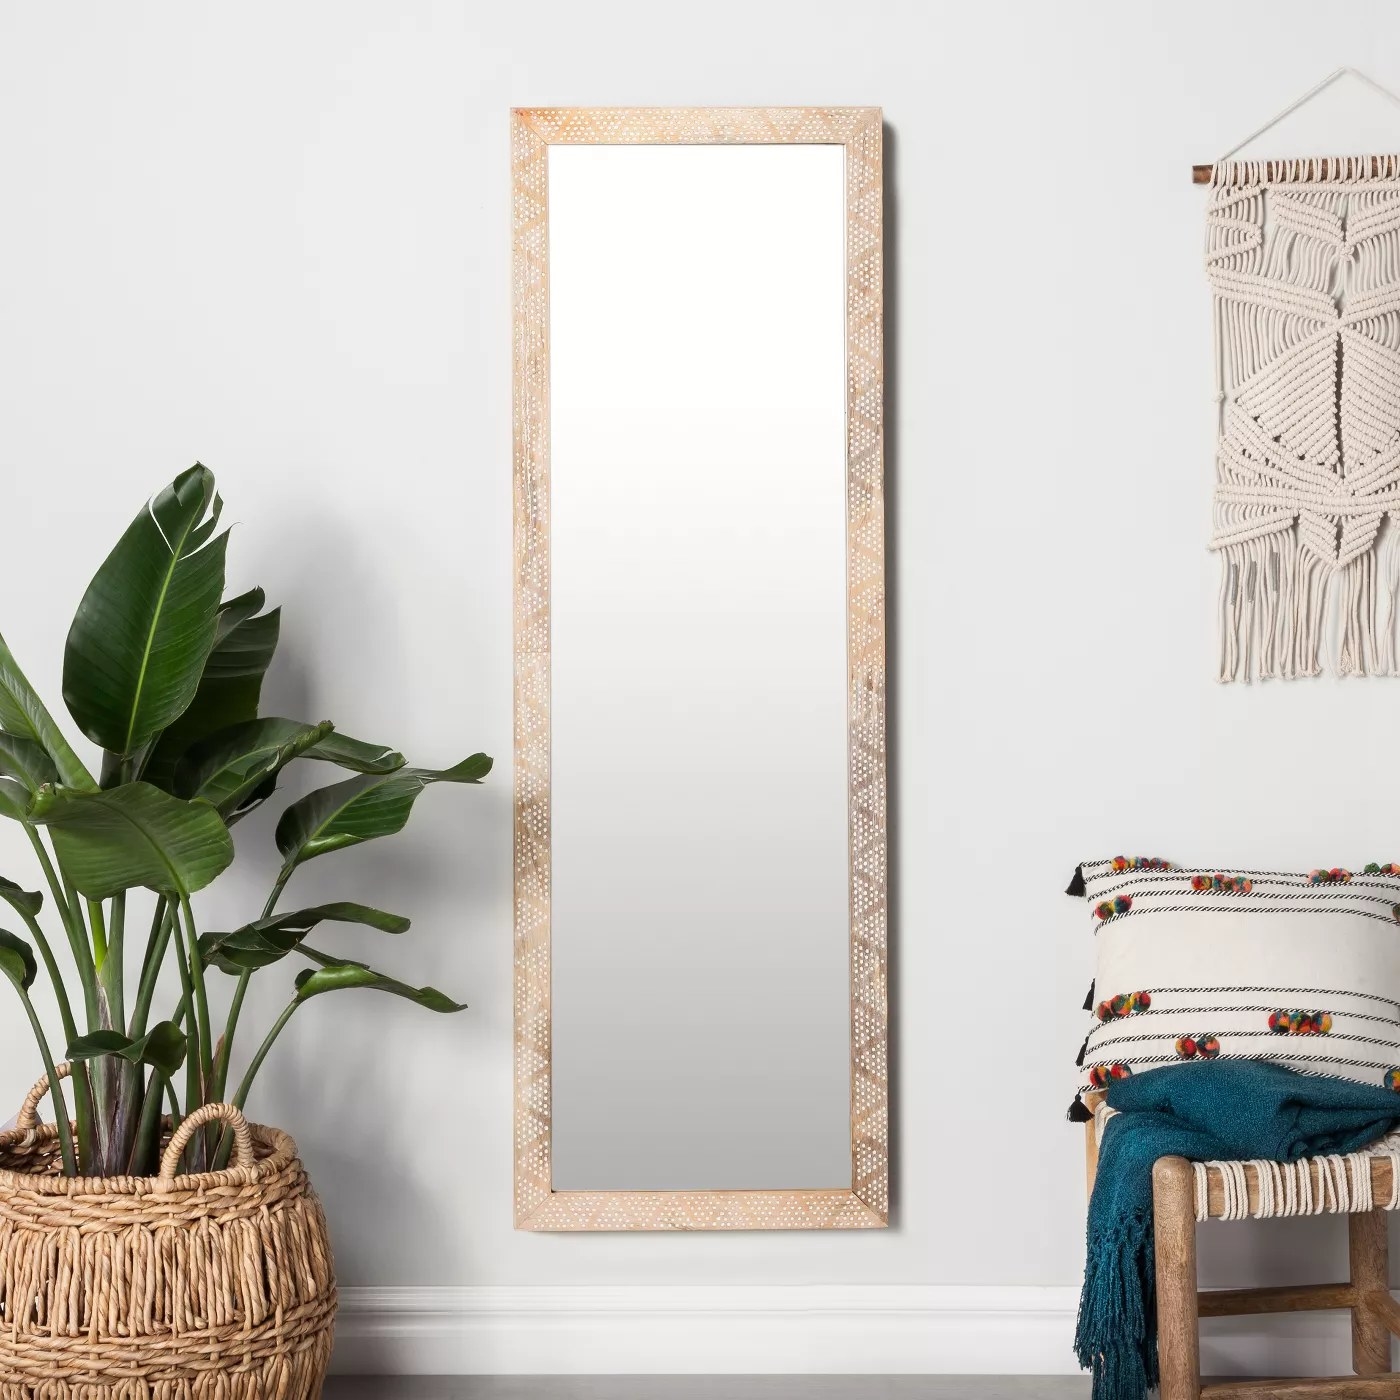 The rectangular mirror with a white dot pattern hanging on a wall in a living room